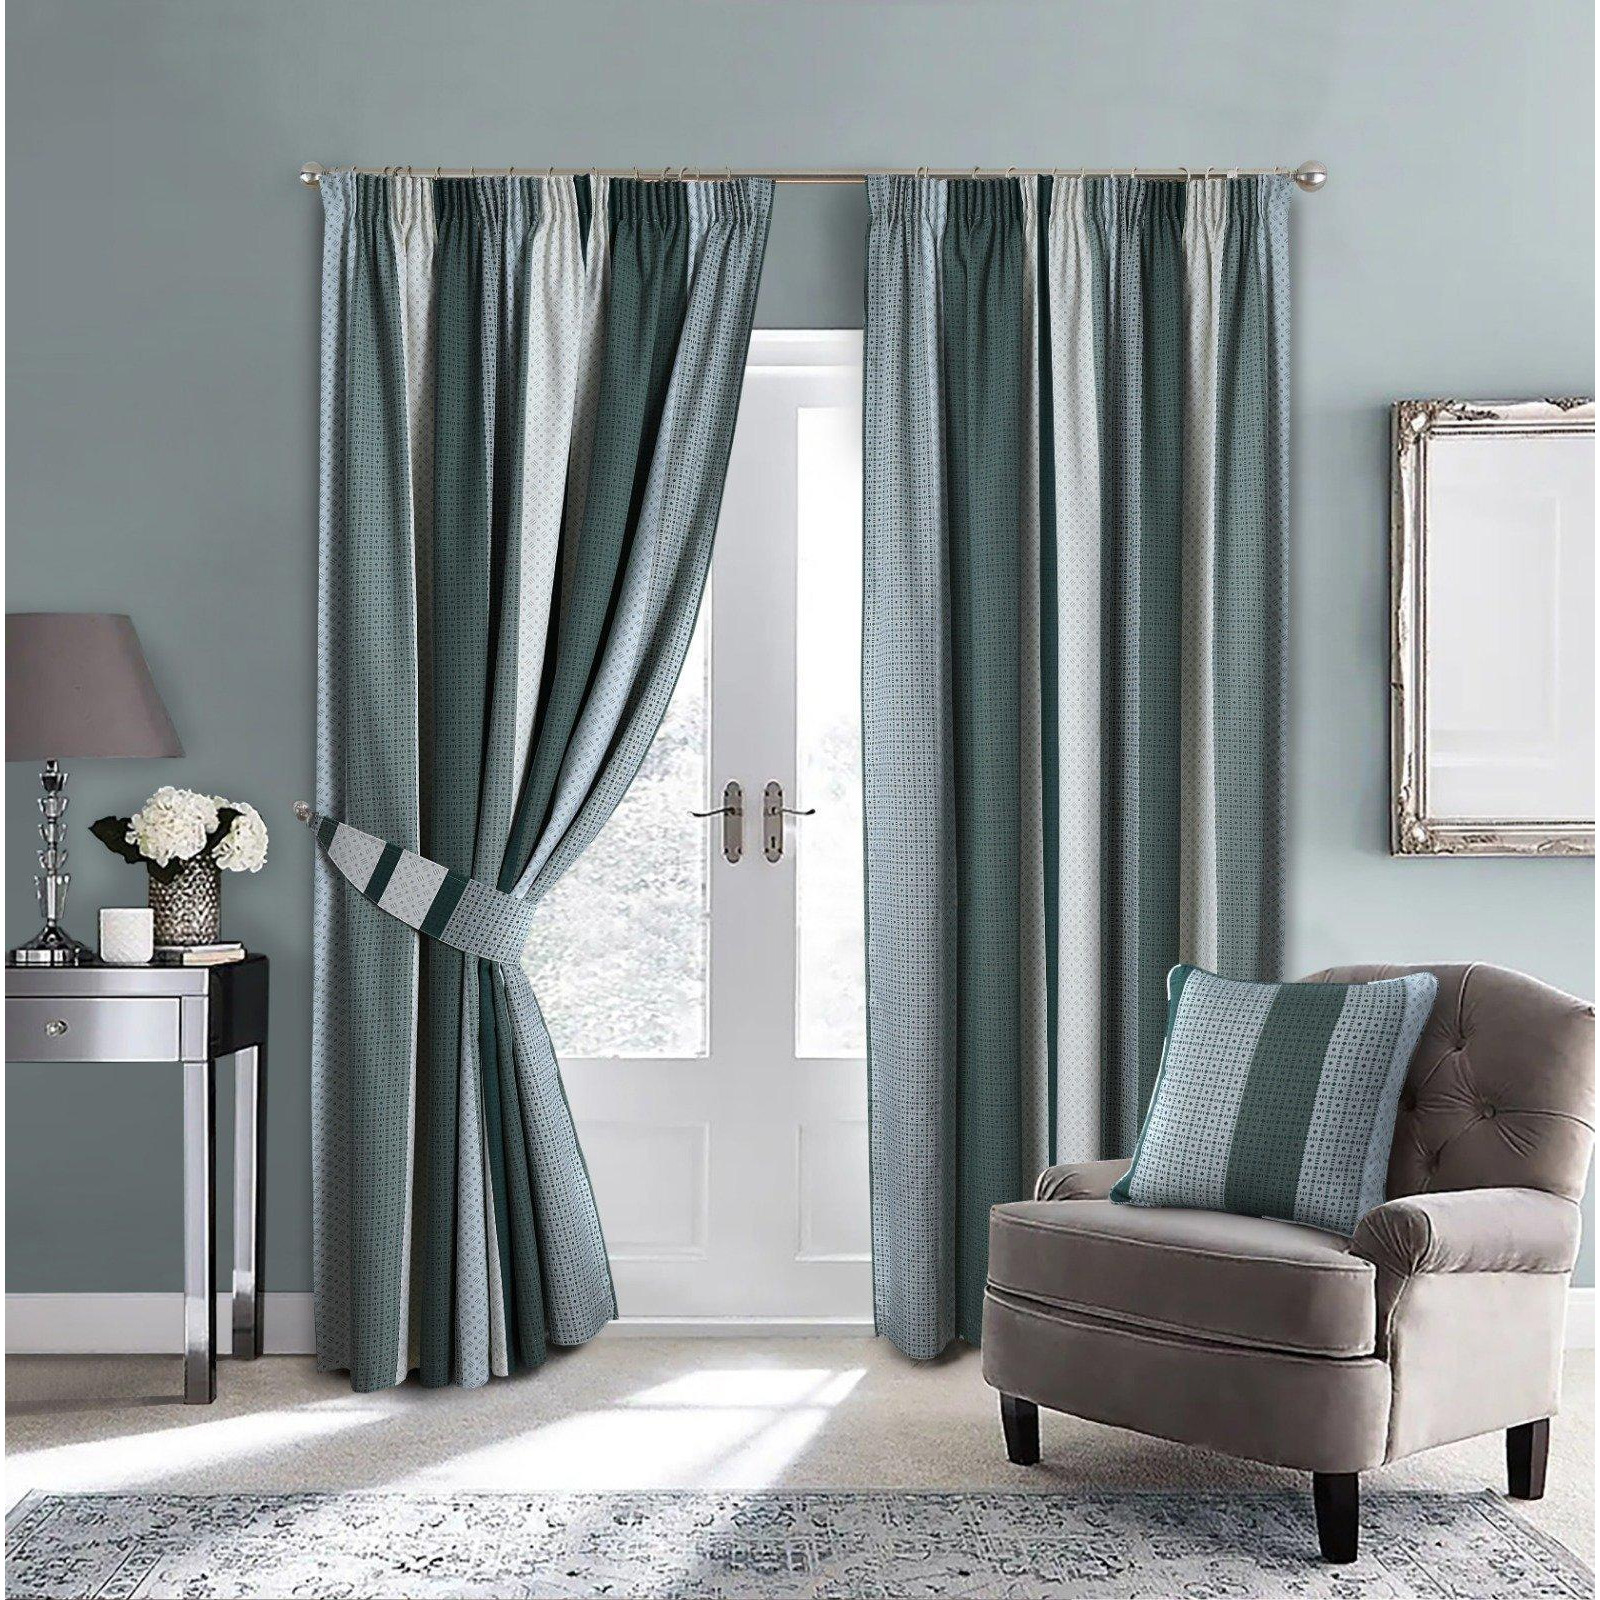 Seville Printed Fully Lined 3 Inches Pencil Pleat  curtains with Tiebacks included pair - image 1